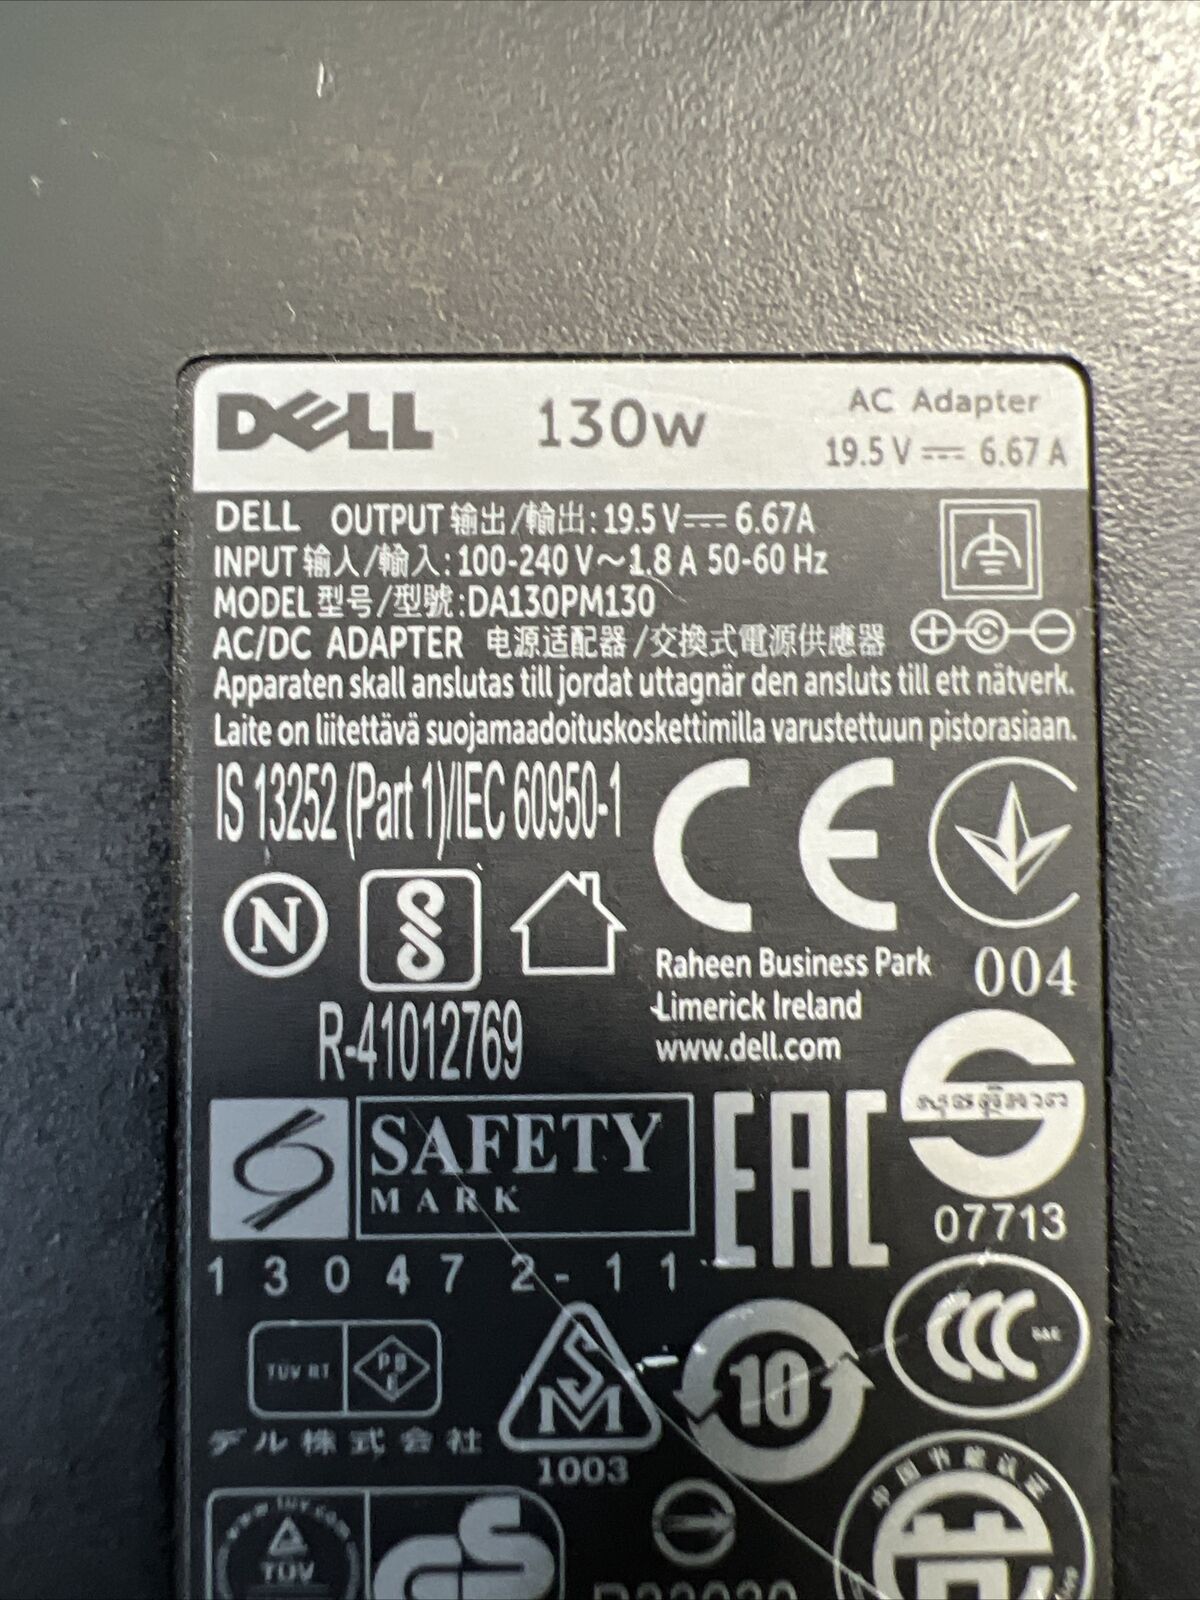 Original Dell Adapter (rarely used).  19.5V 6.7A 130W Laptop Charger.